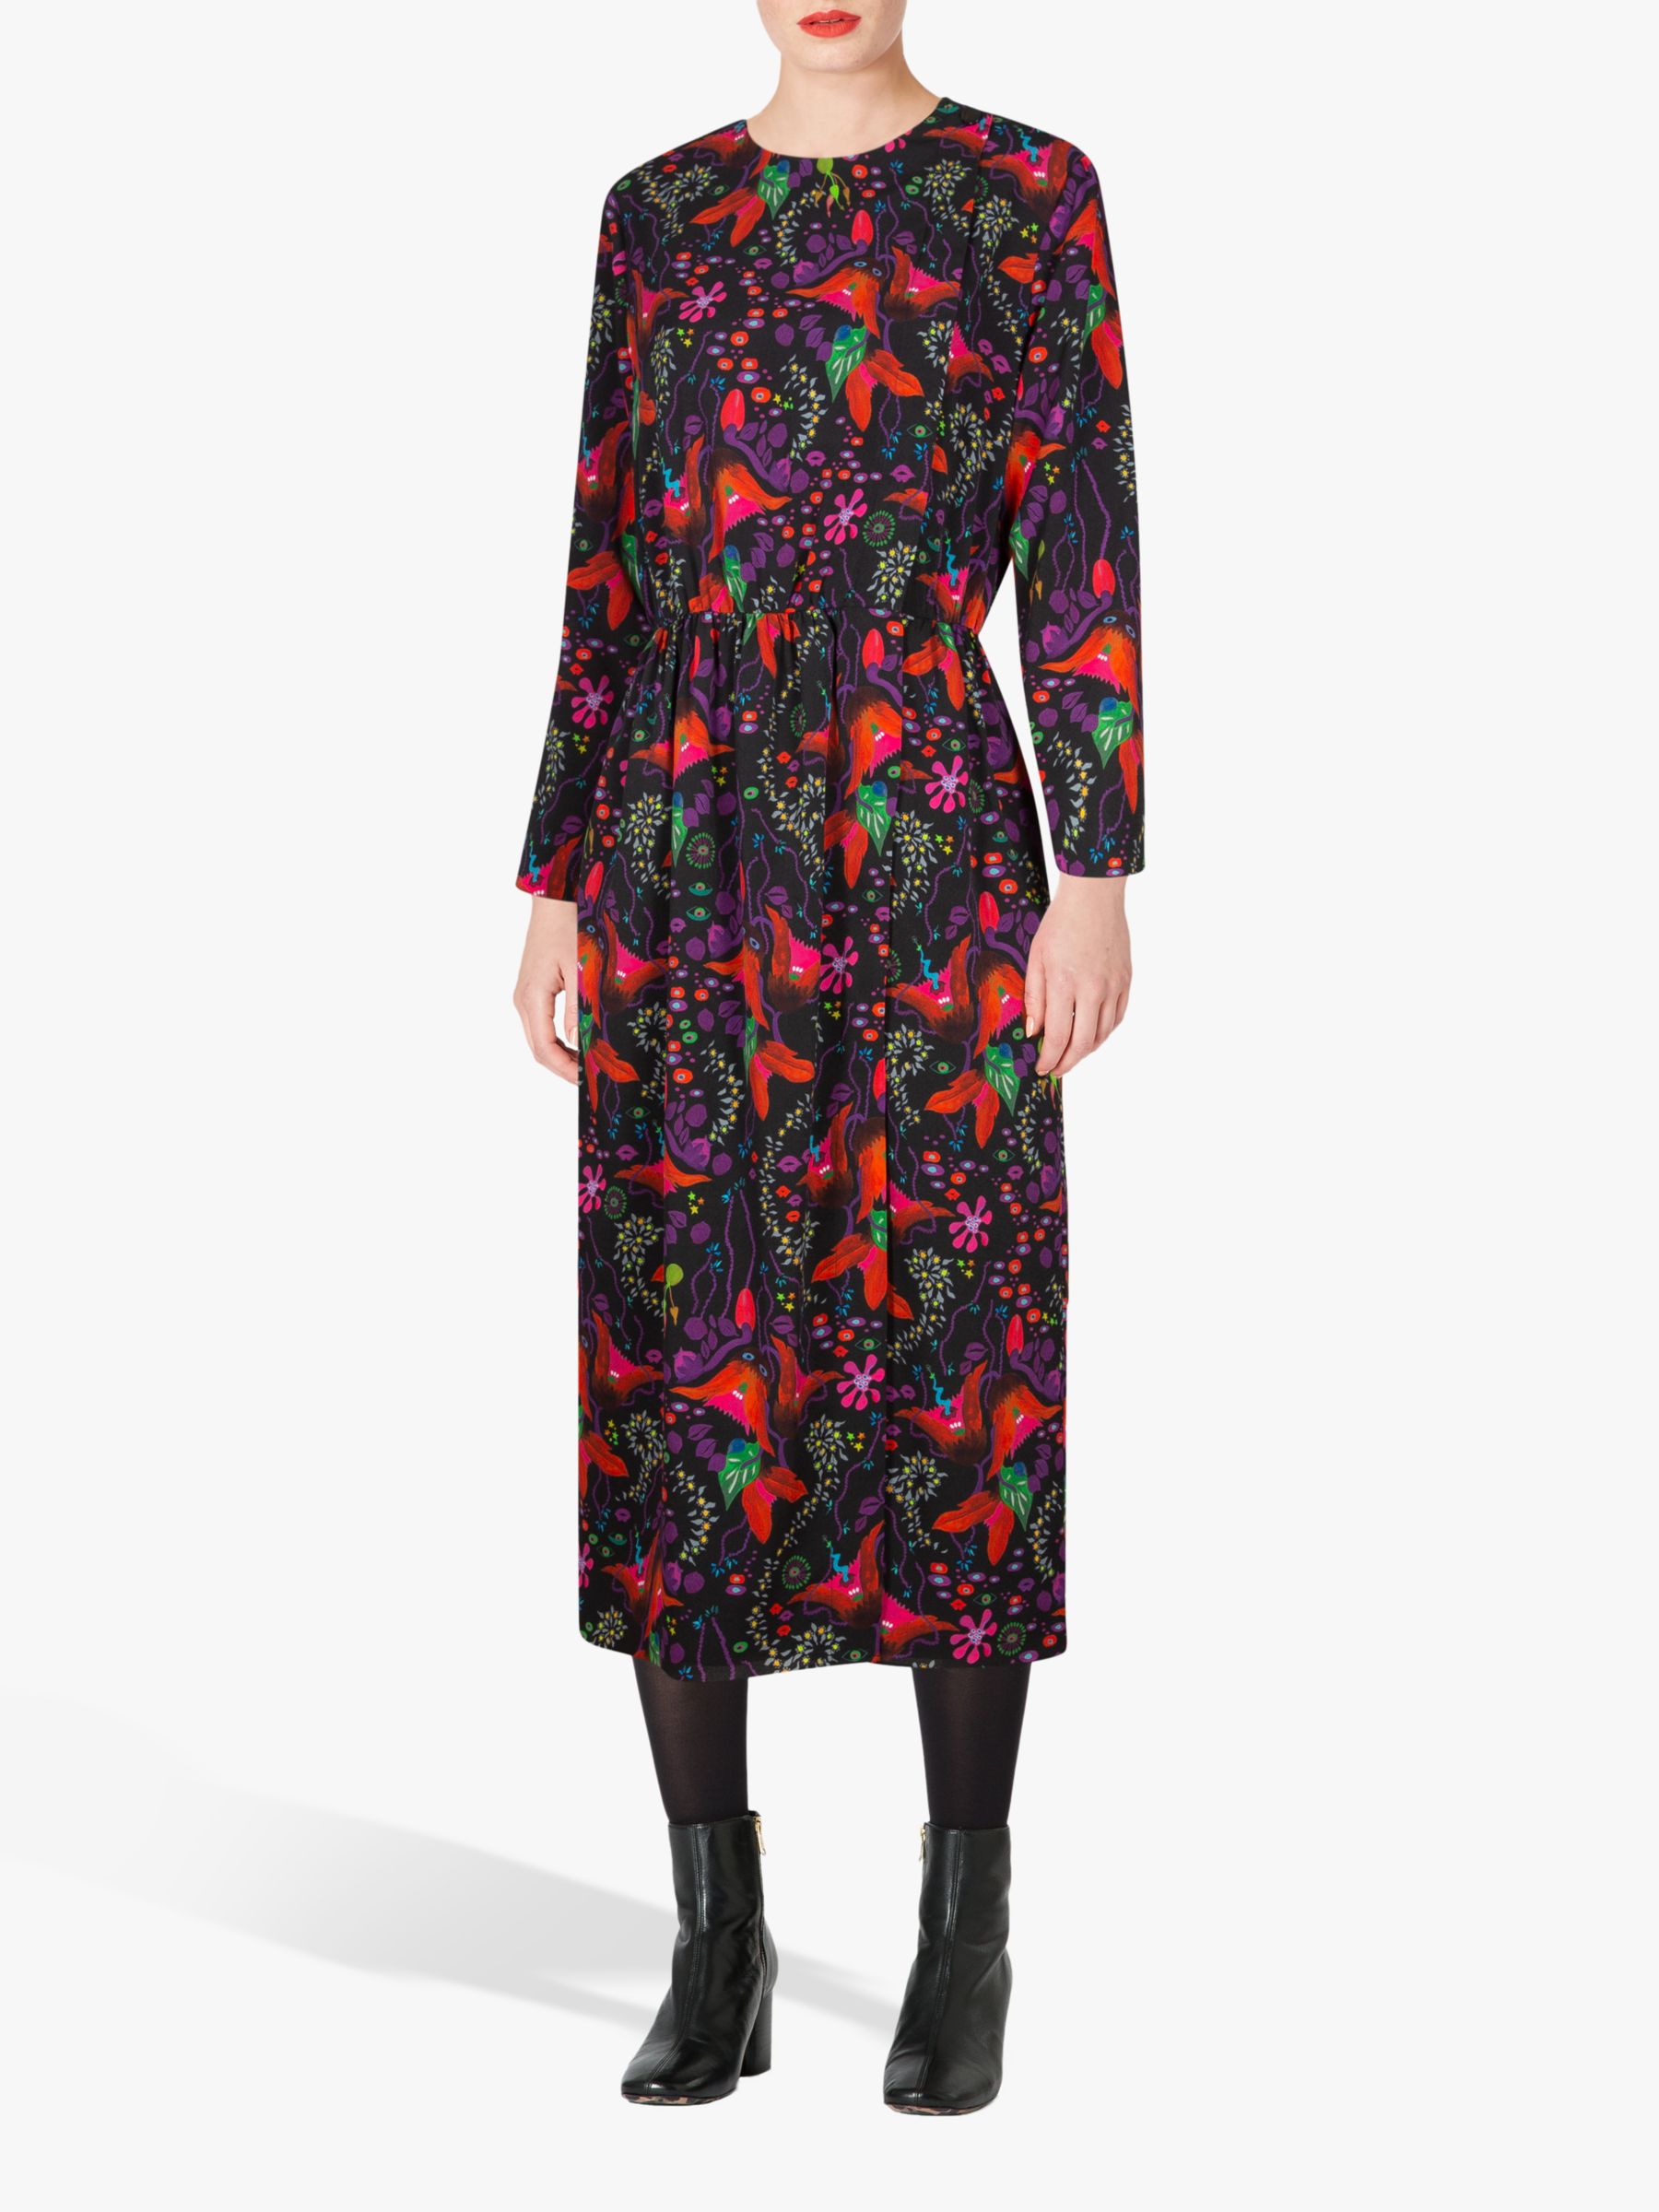 PS Paul Smith Earthling Floral Dress, Black